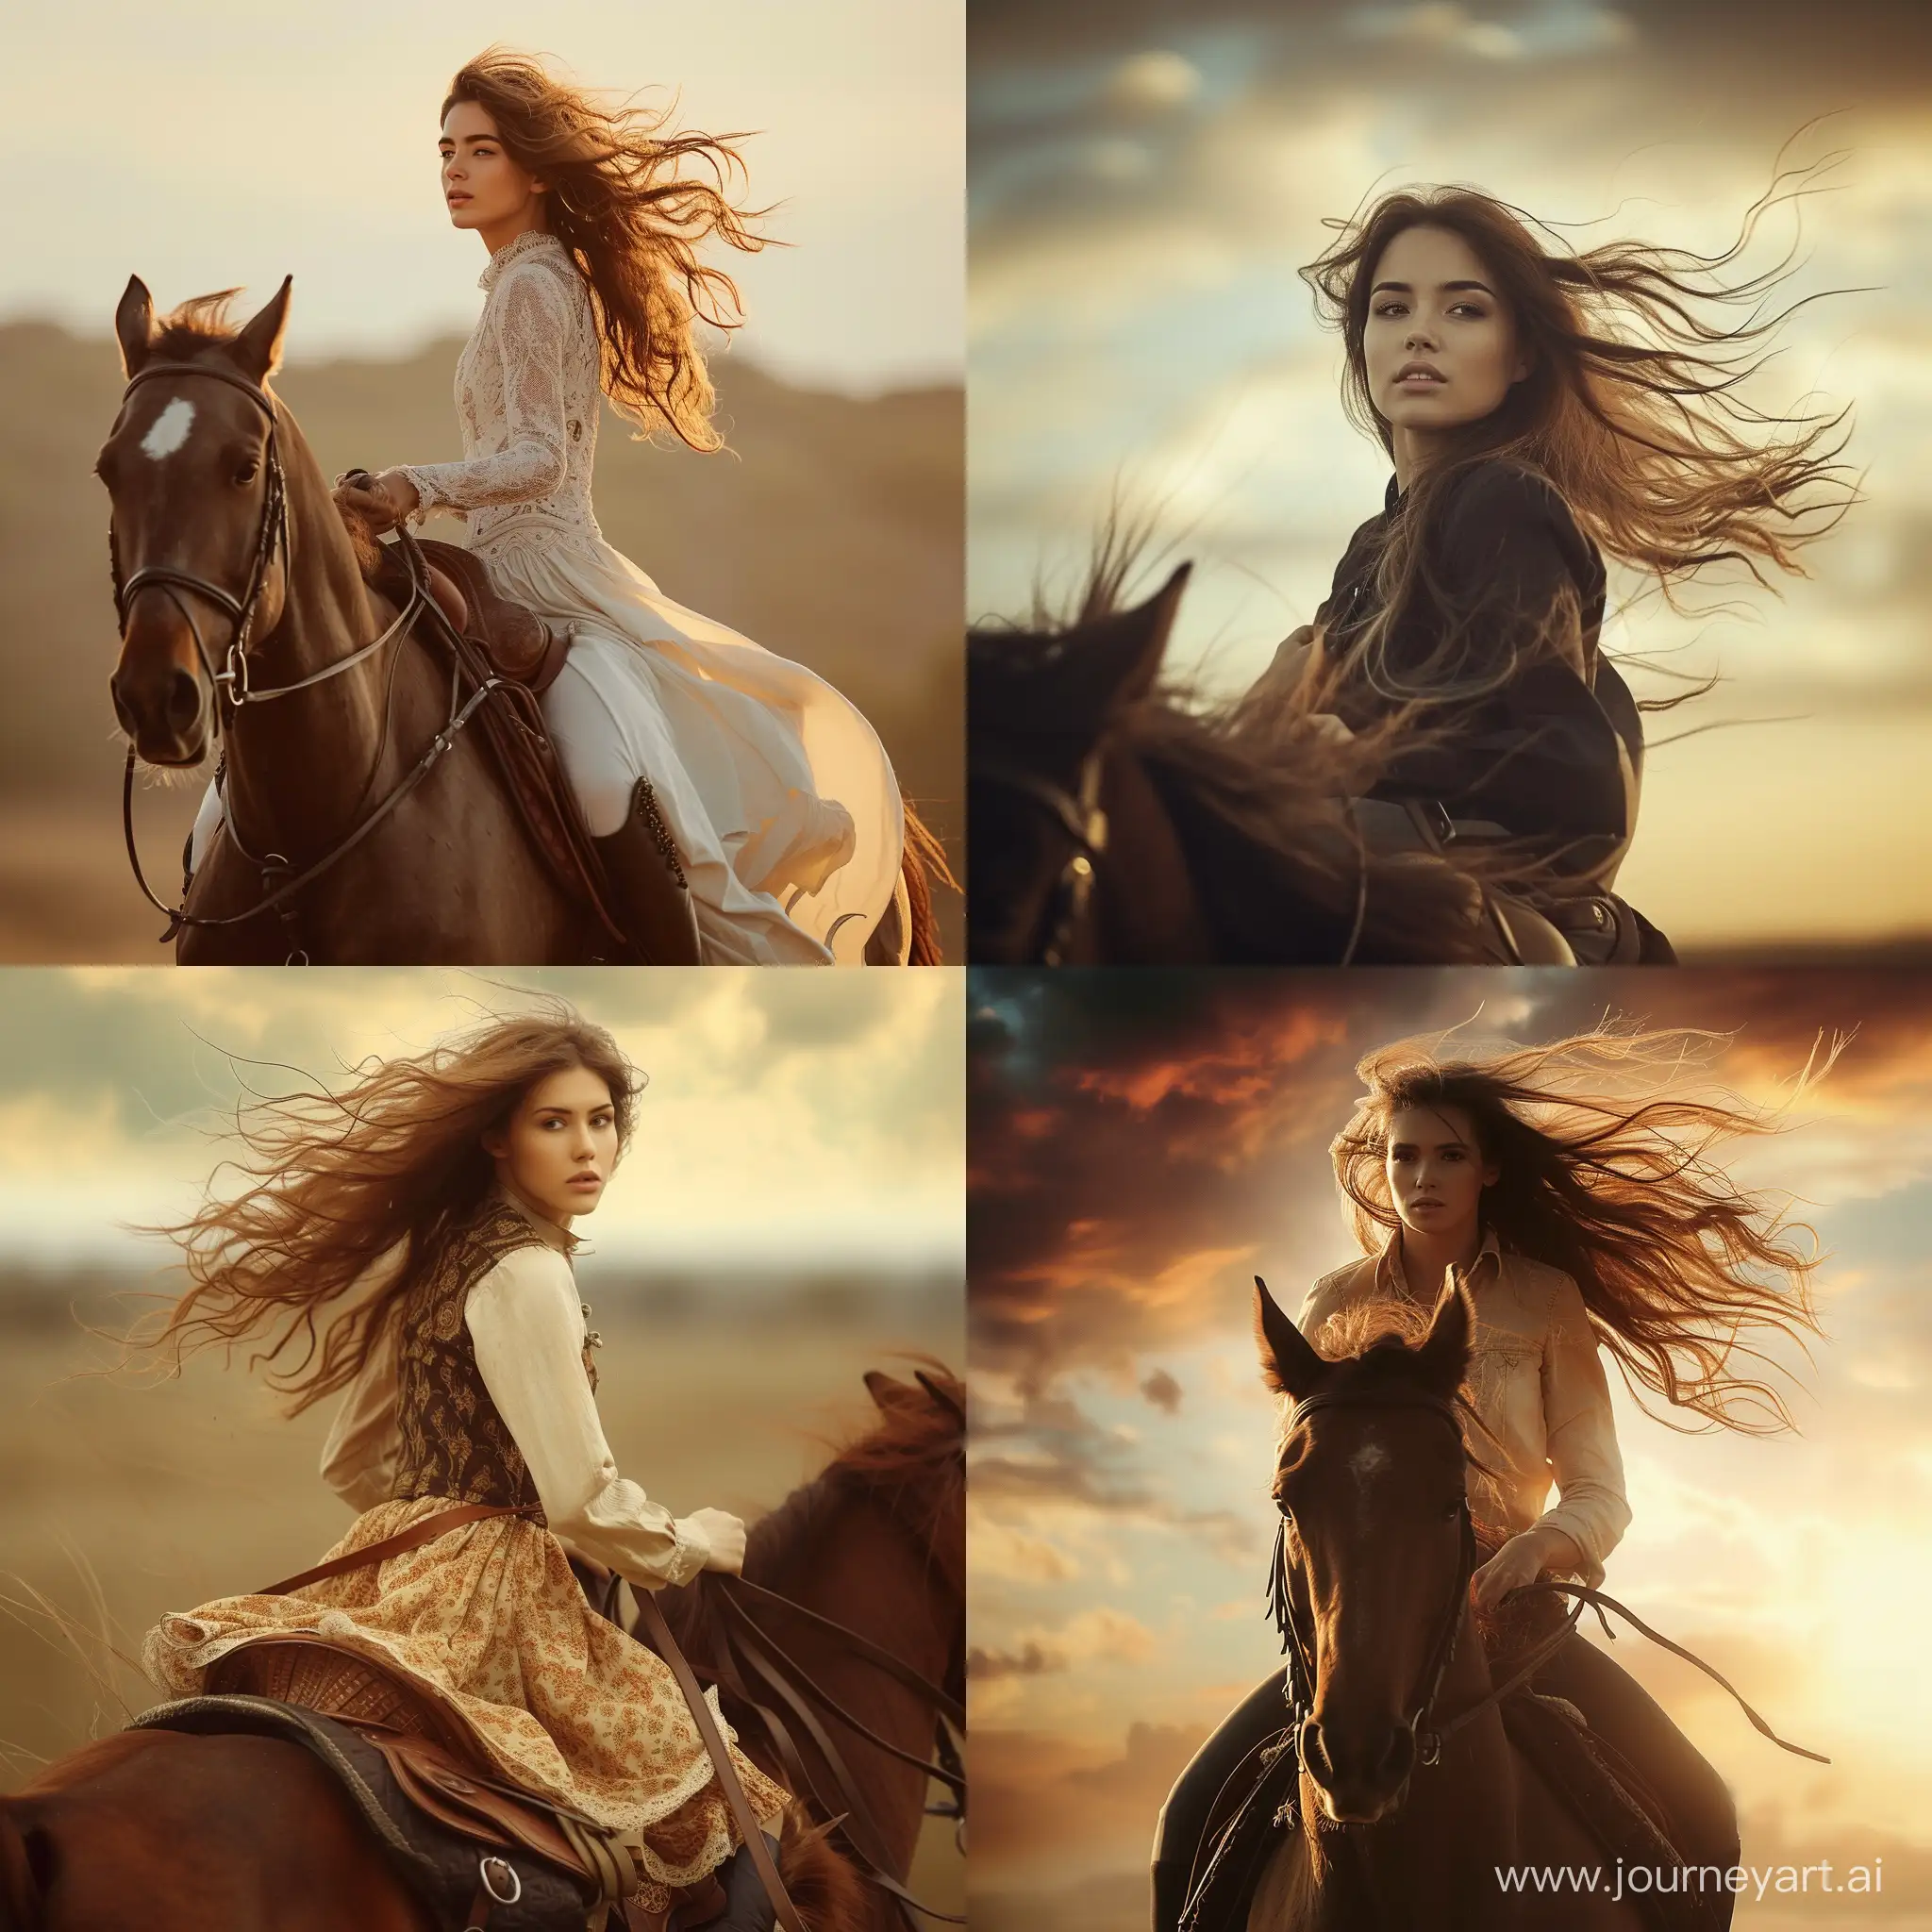 A beautiful woman riding a horse with her hair flowing in the wind 